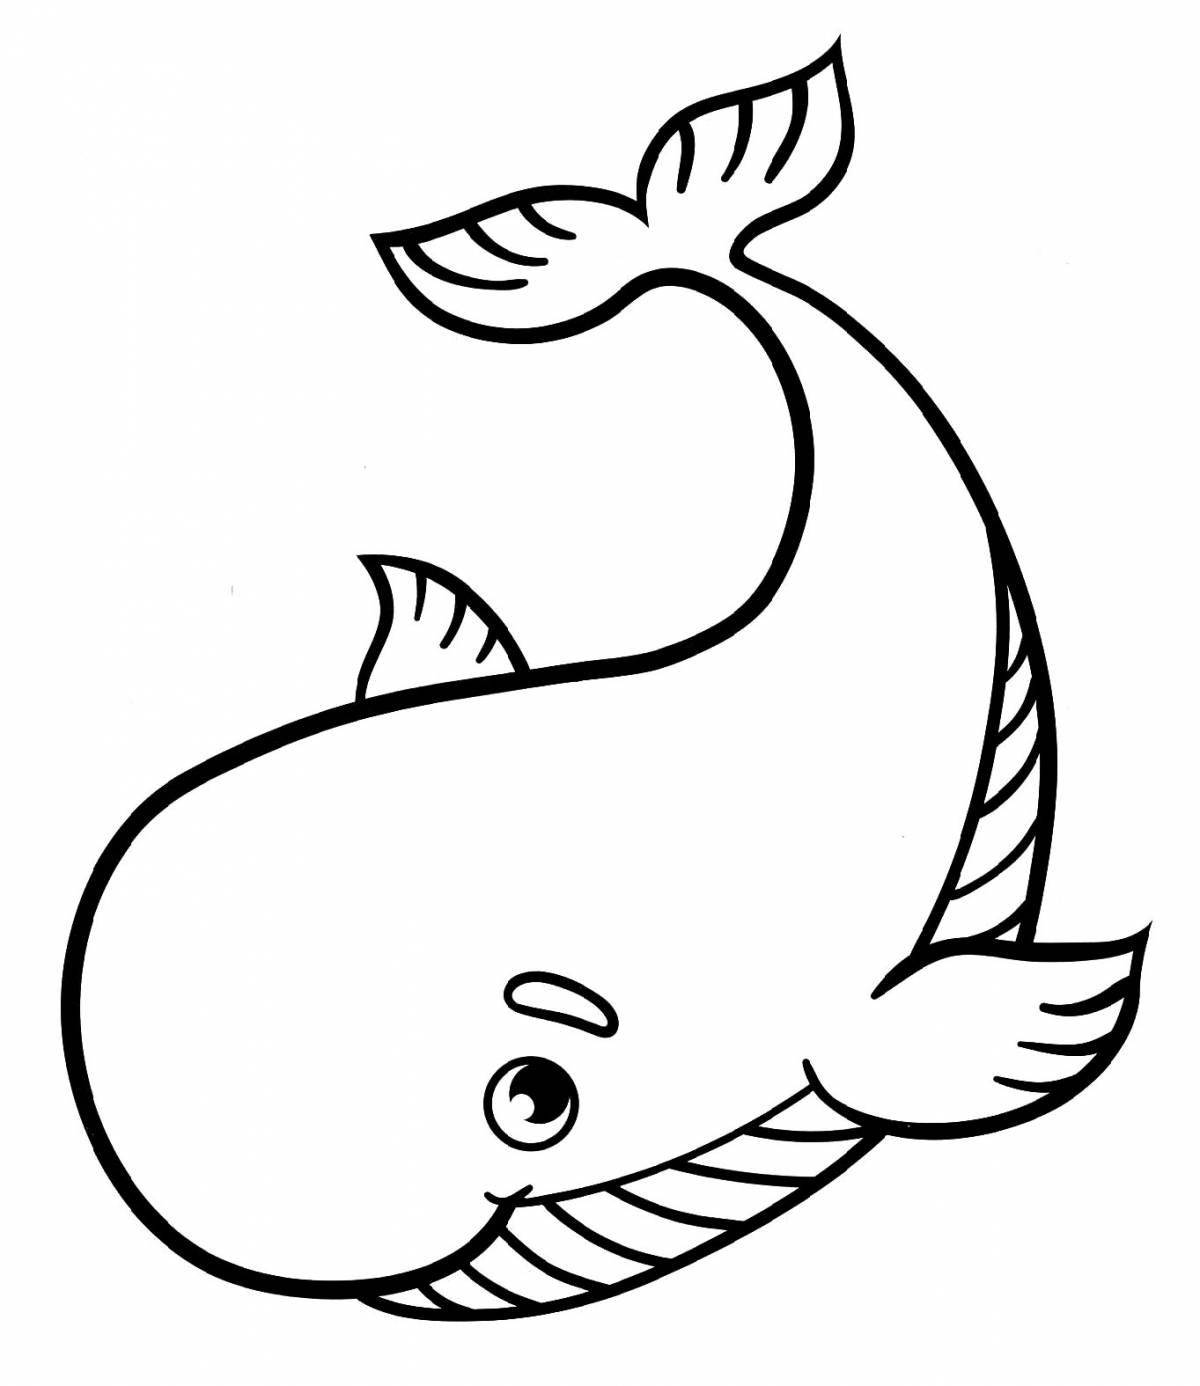 Fun coloring book with whales for 3-4 year olds